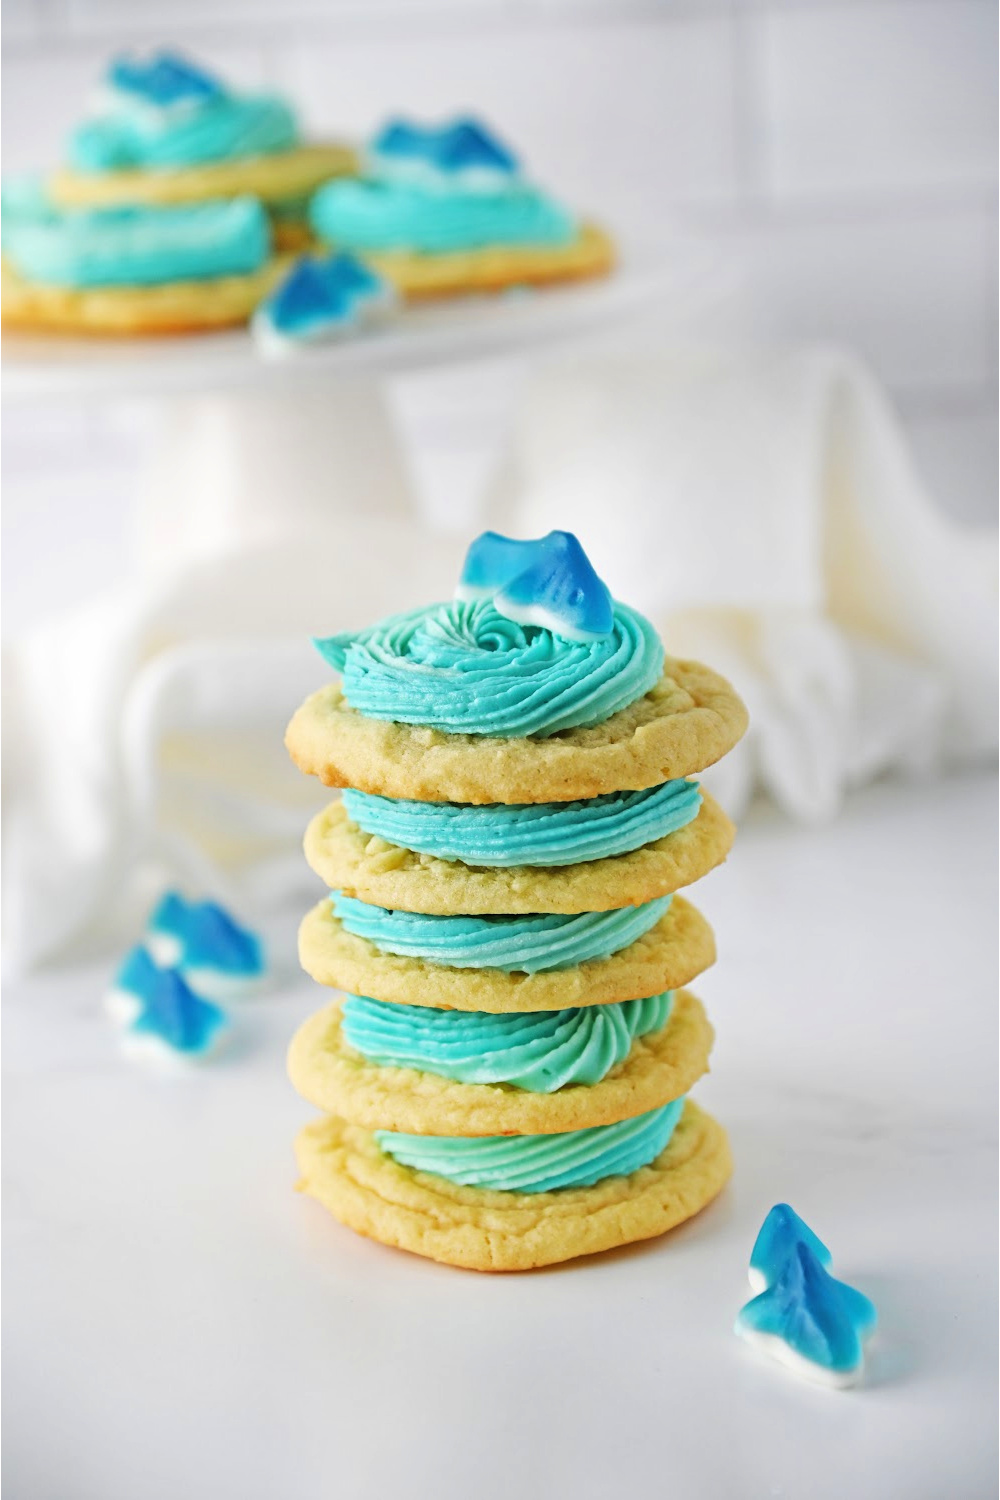 Stacked Shark cookies on a white background with blue icing and a gummy shark.